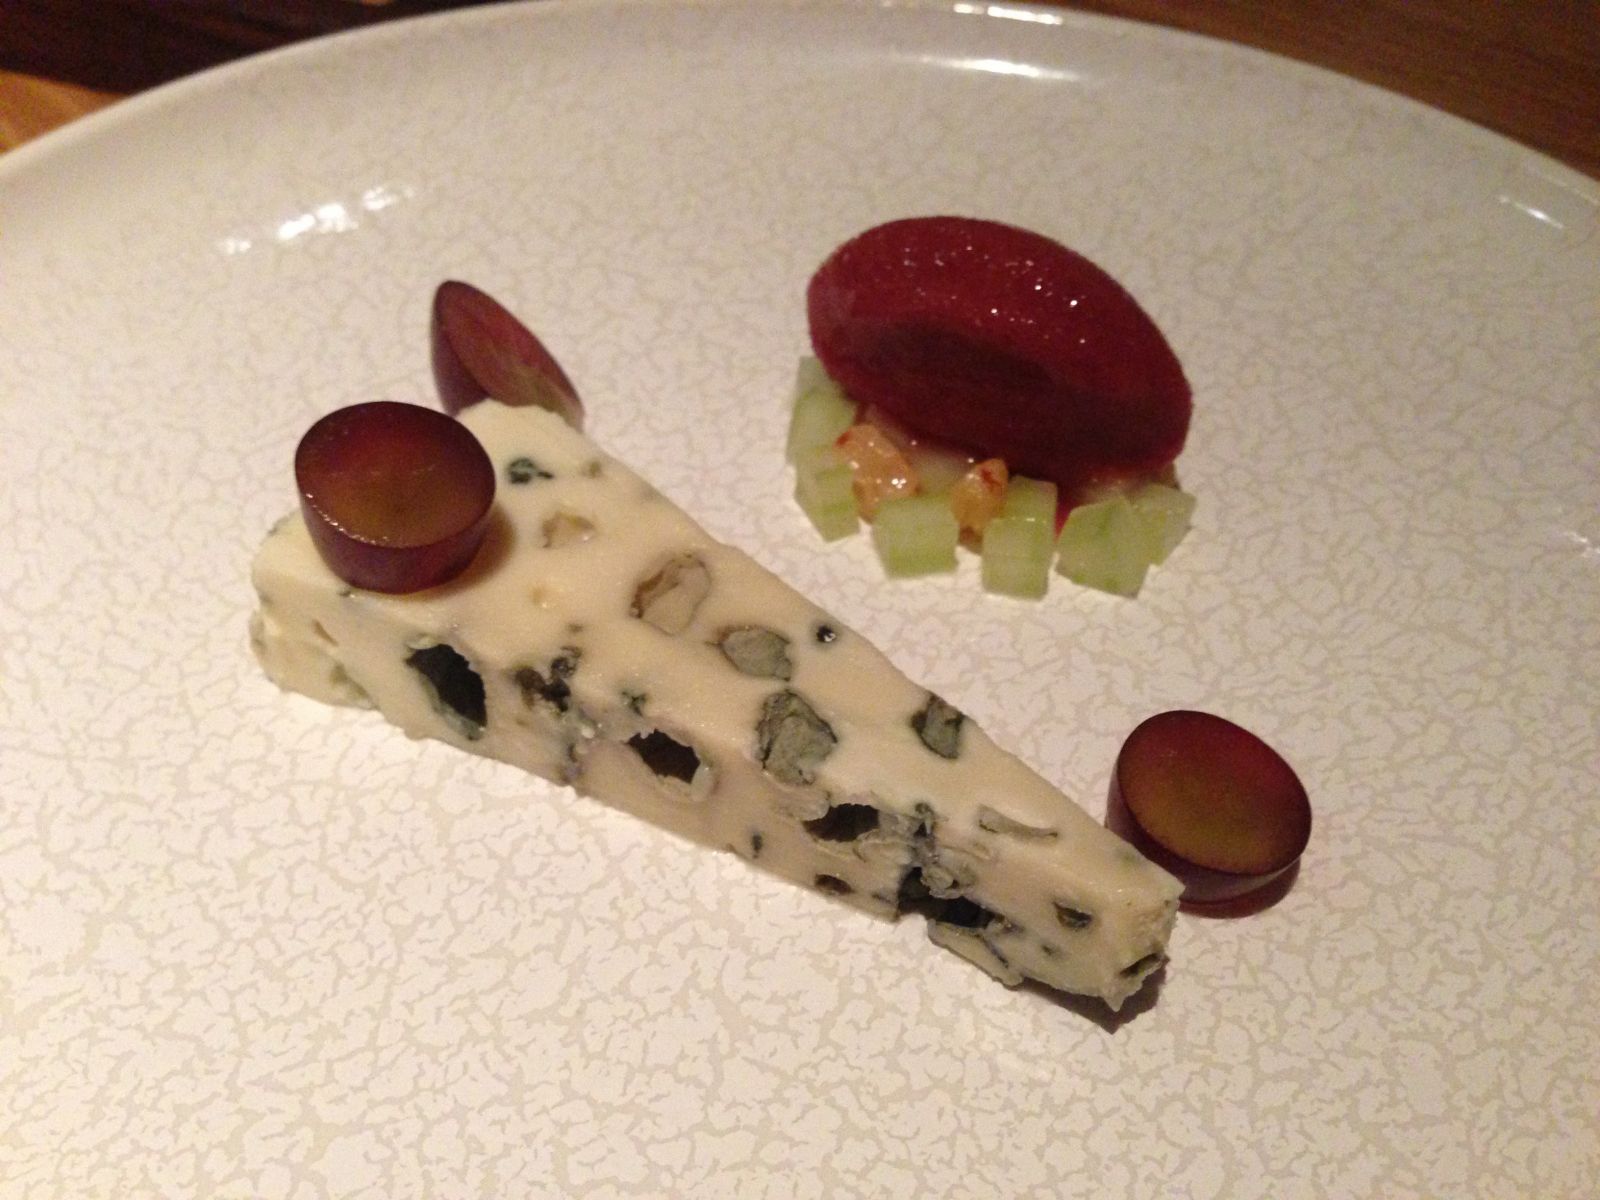 Roquefort cheese at The Olive Tree - Bath